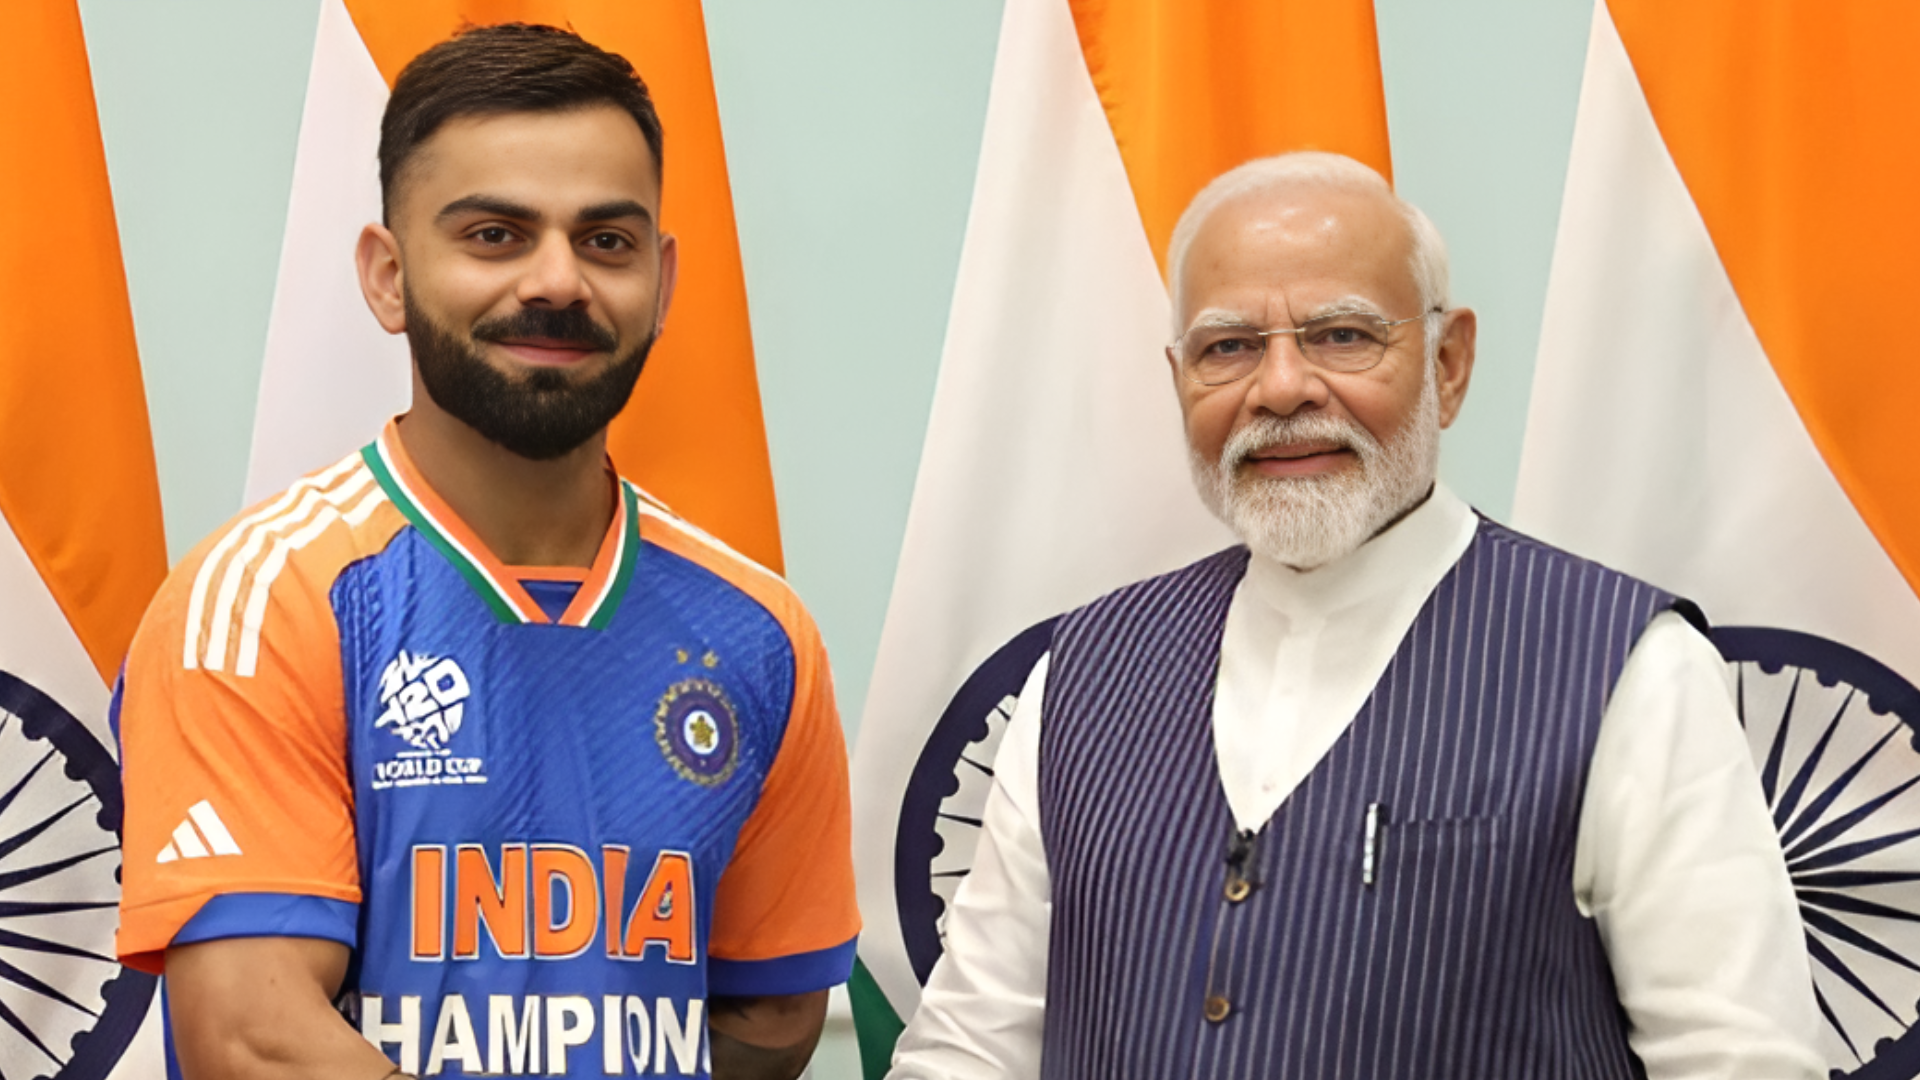 Virat Kohli Opens Up To PM Modi About Not Being Confident Ahead Of T20 World Cup Final, Here’s What He Told Rohit Sharma